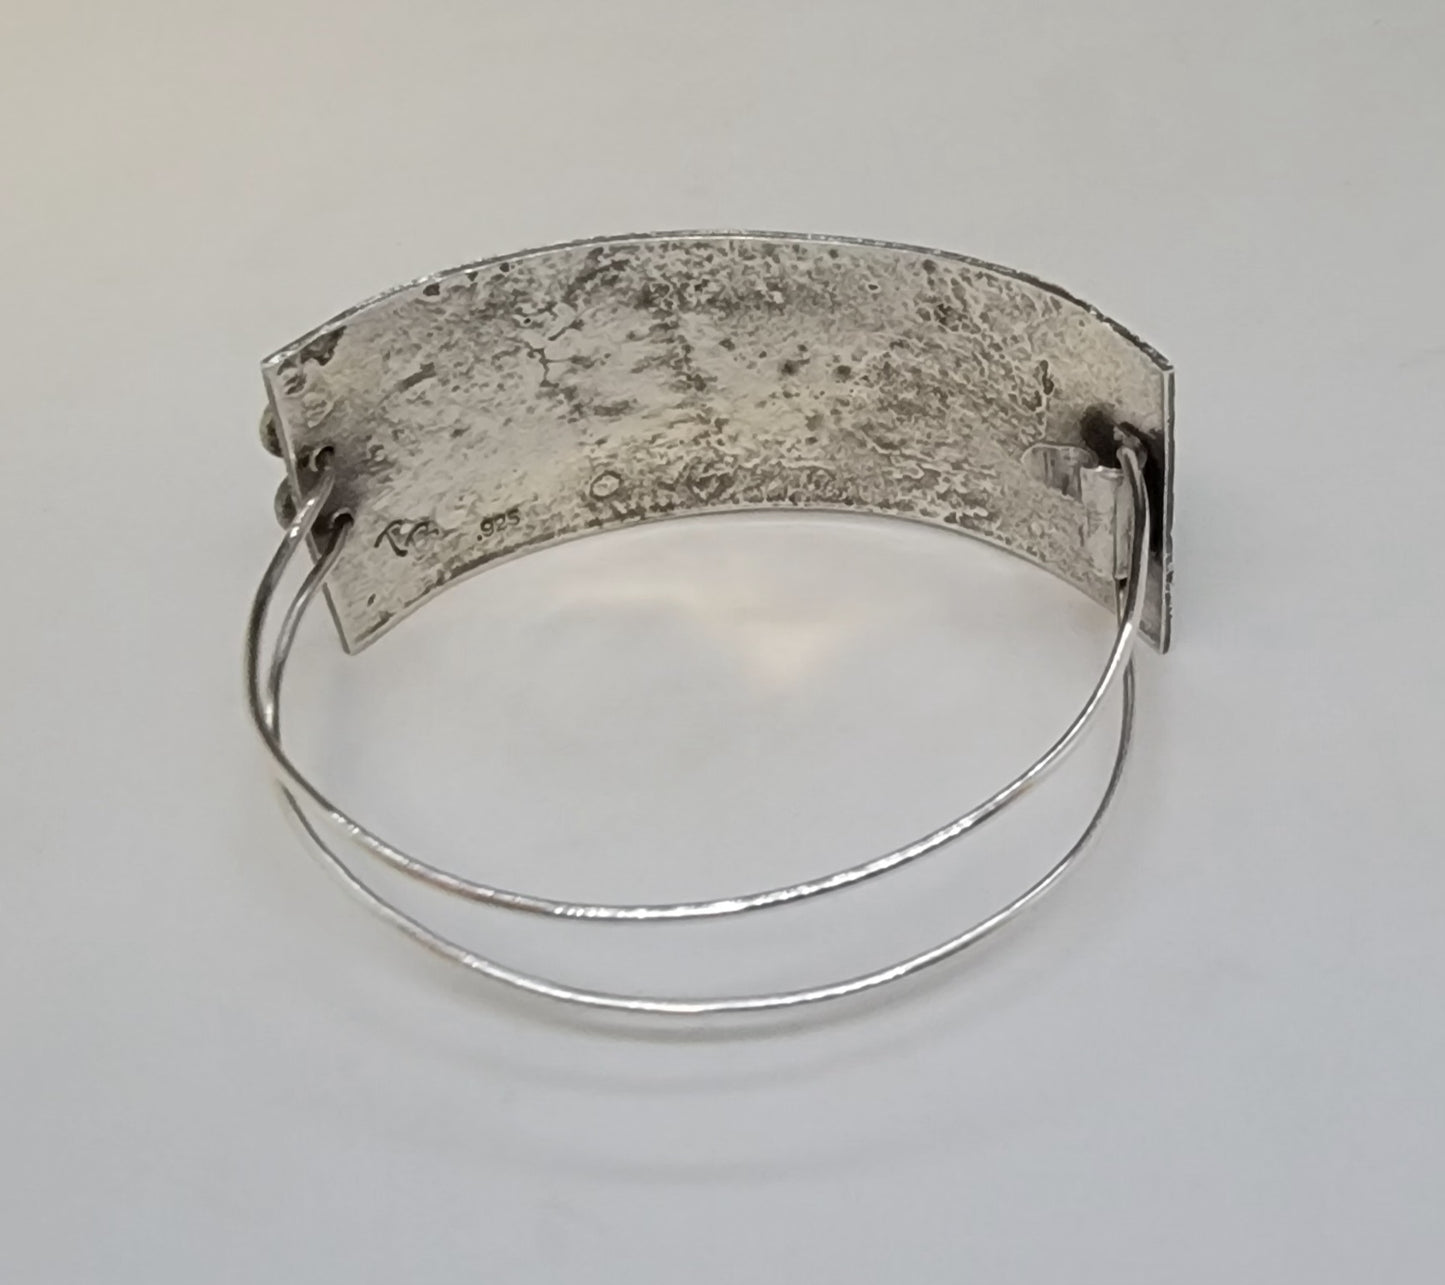 Reticulated Silver Bracelet